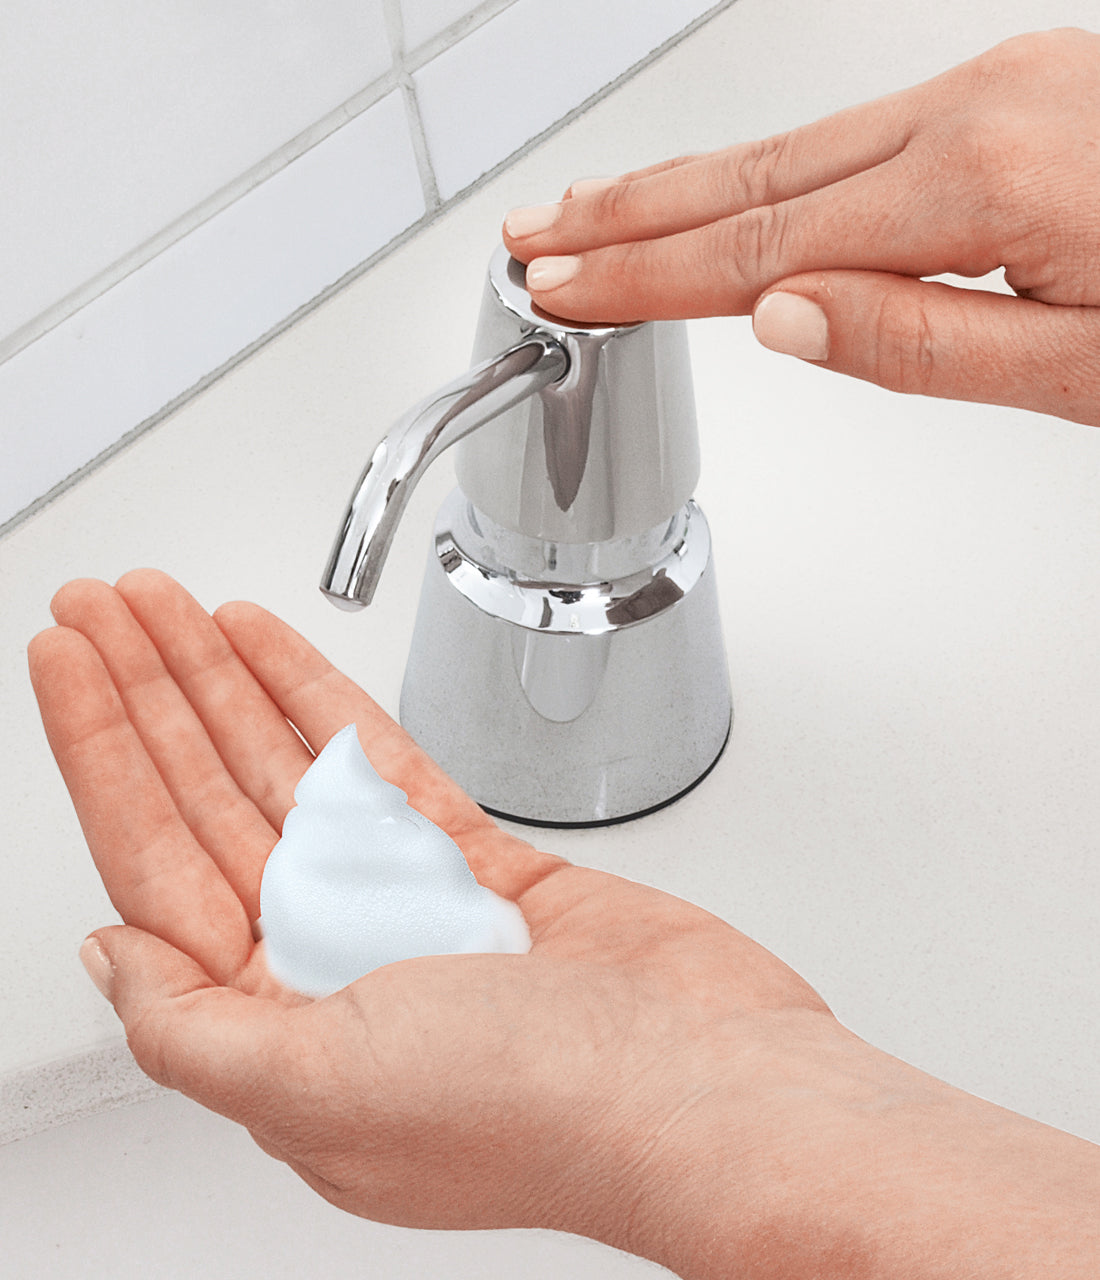 A hand under the Bobrick B-8231 foaming soap dispenser with some foam soap in it.